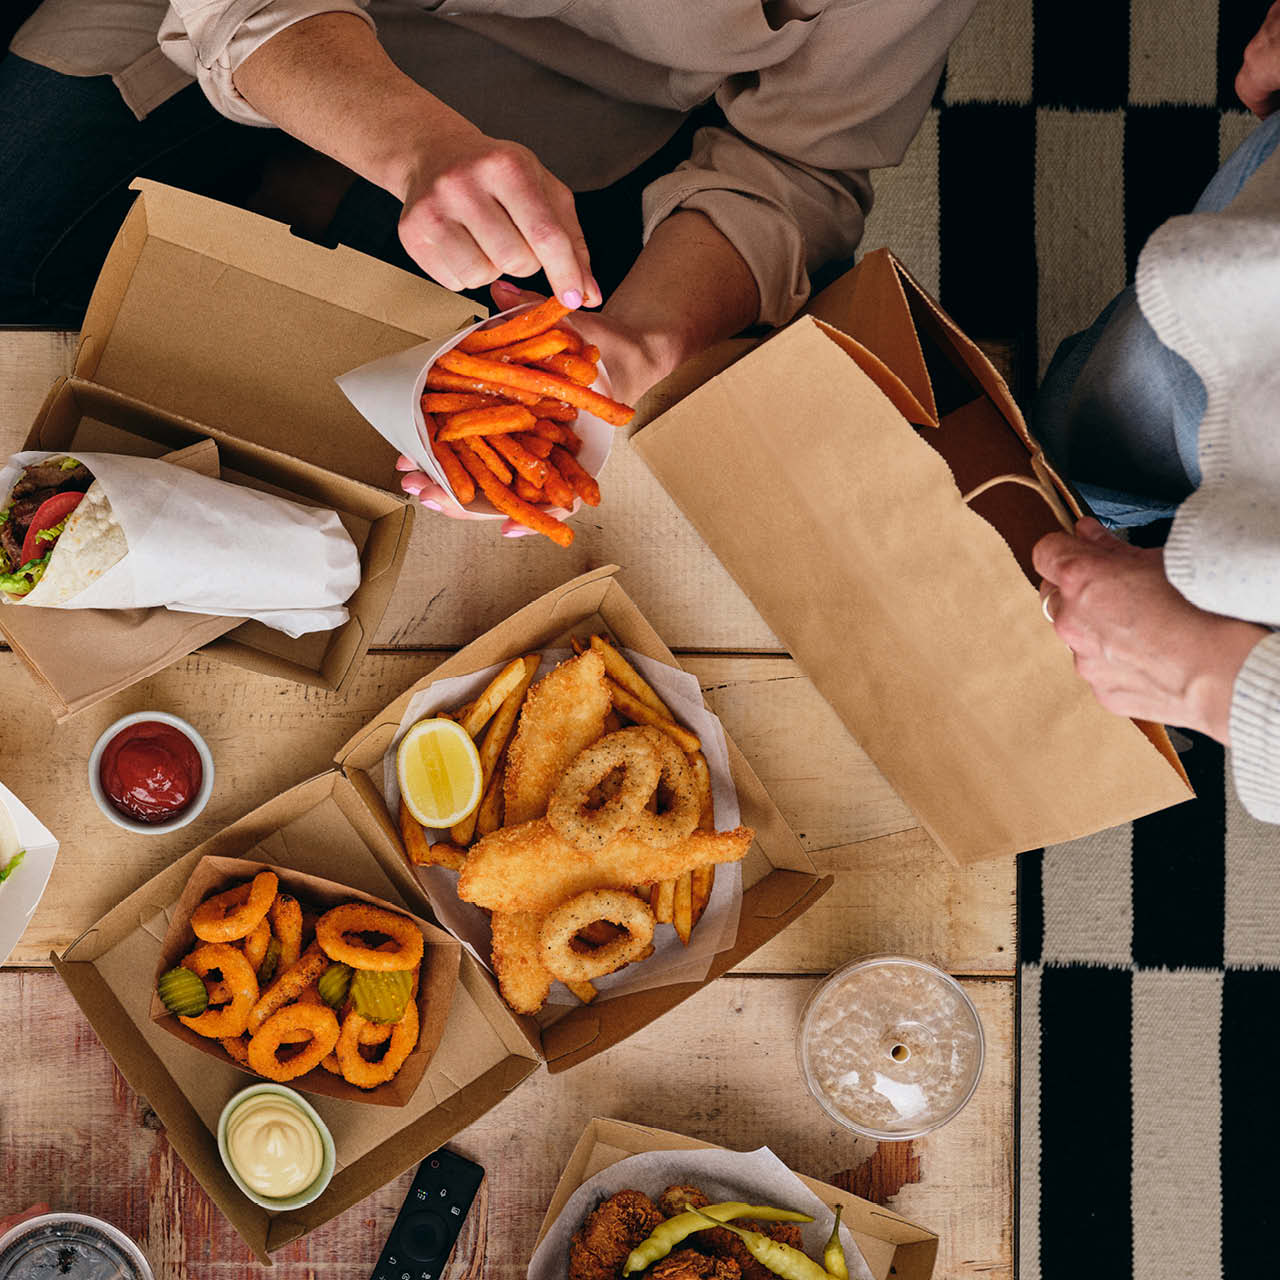 Make the sustainable switch to paper bags from Detpak to carry your takeaway food